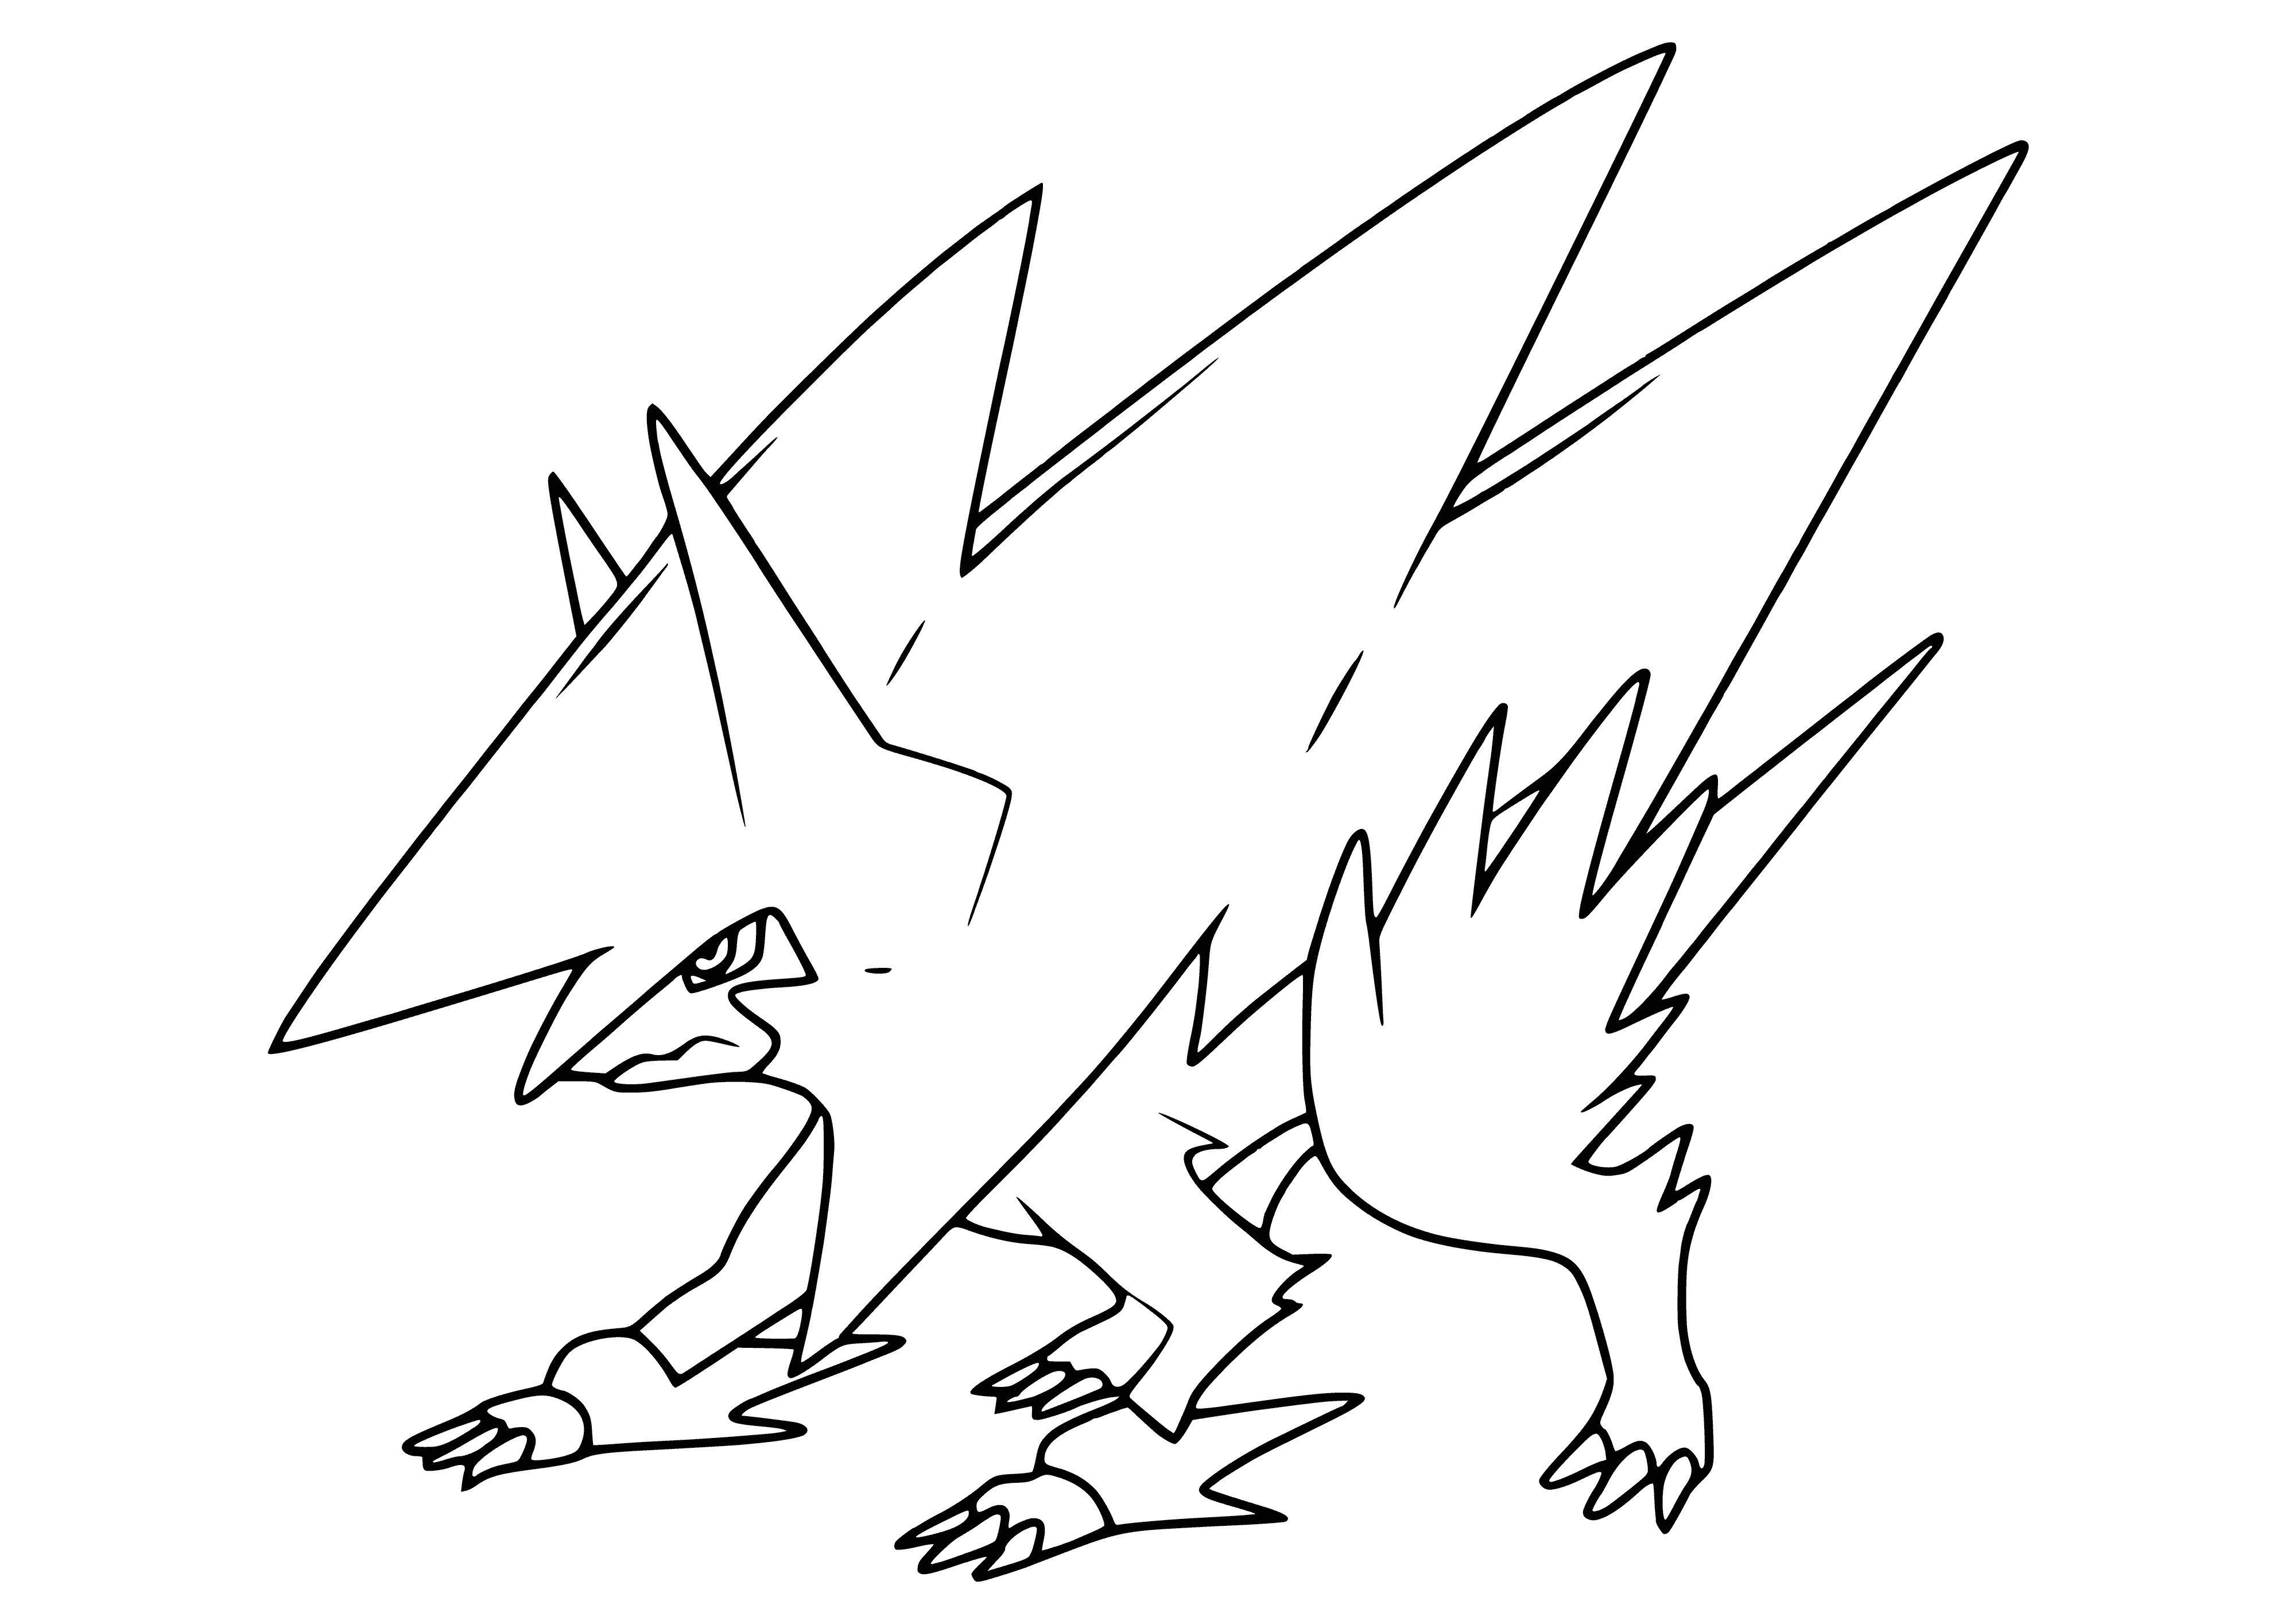 coloring page: Coloring page of electric-type Pokemon Mega Manectric: blue & yellow, white belly, long snout & red gem, three spikes on back, long tail.